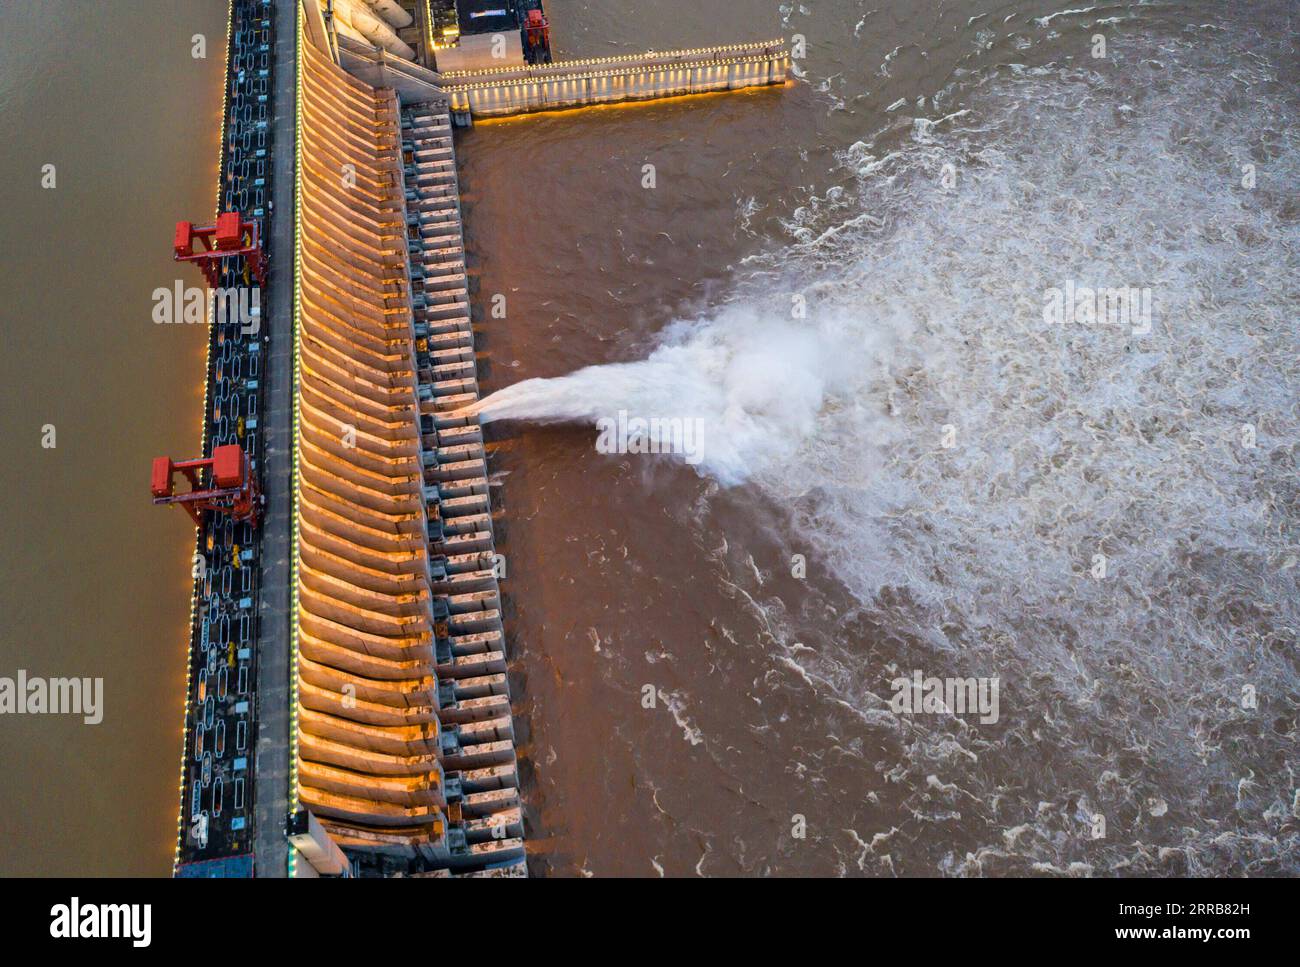 210906 -- YICHANG, Sept. 6, 2021 -- Aerial photo taken on Sept. 6, 2021 shows a view of the Three Gorges Dam in central China s Hubei Province. Chinese authorities have called for rigorous anti-flooding measures along the Yangtze River as water levels continue to rise following heavy rainfall, the Ministry of Water Resources said on Monday. The flow of water at the Three Gorges reservoir has increased rapidly, reaching 54,000 cubic meters per second as of 2 p.m. Monday. The ministry said it is maintaining its response at Level IV, and has called for more anti-flooding measures at the Three Gor Stock Photo